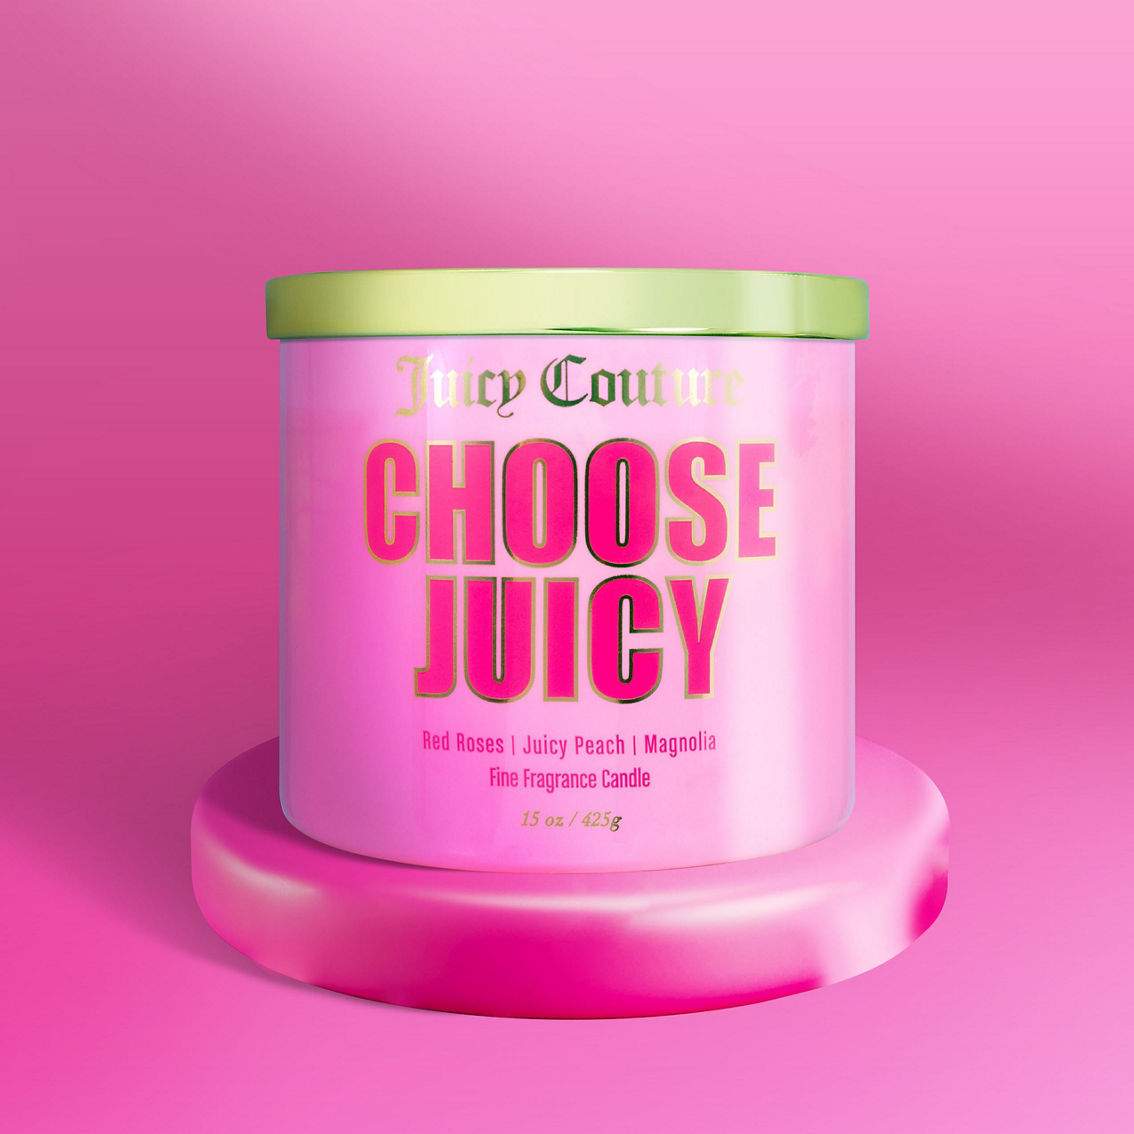 Juicy Couture Choose Juicy 3 Wick Candle - Image 4 of 5